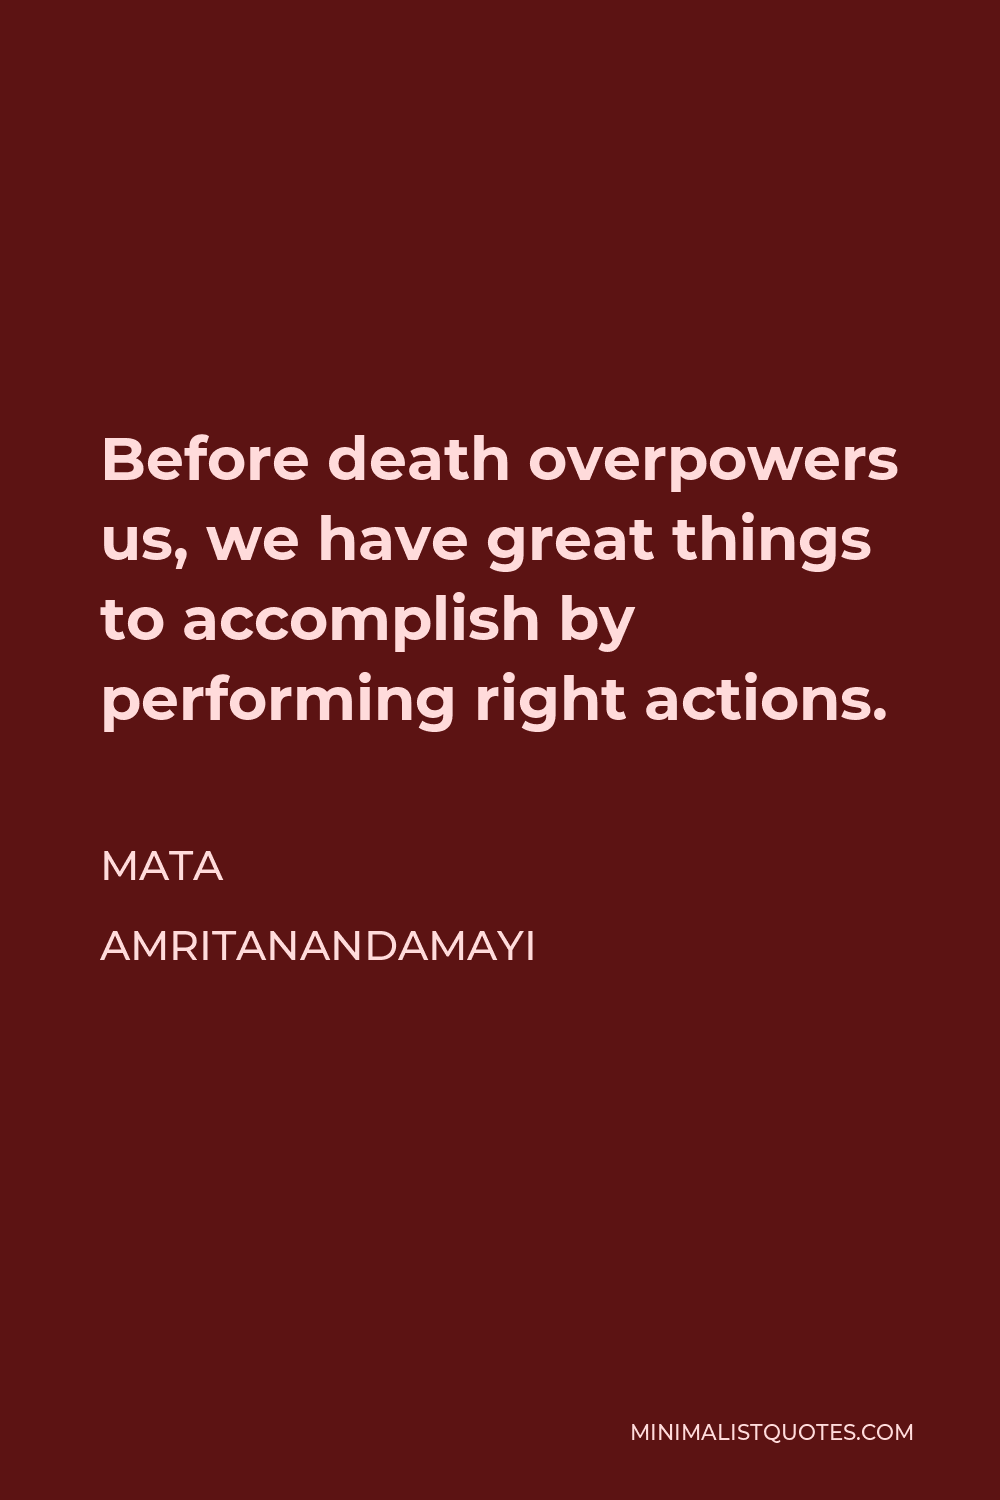 Mata Amritanandamayi Quote - Before death overpowers us, we have great things to accomplish by performing right actions.